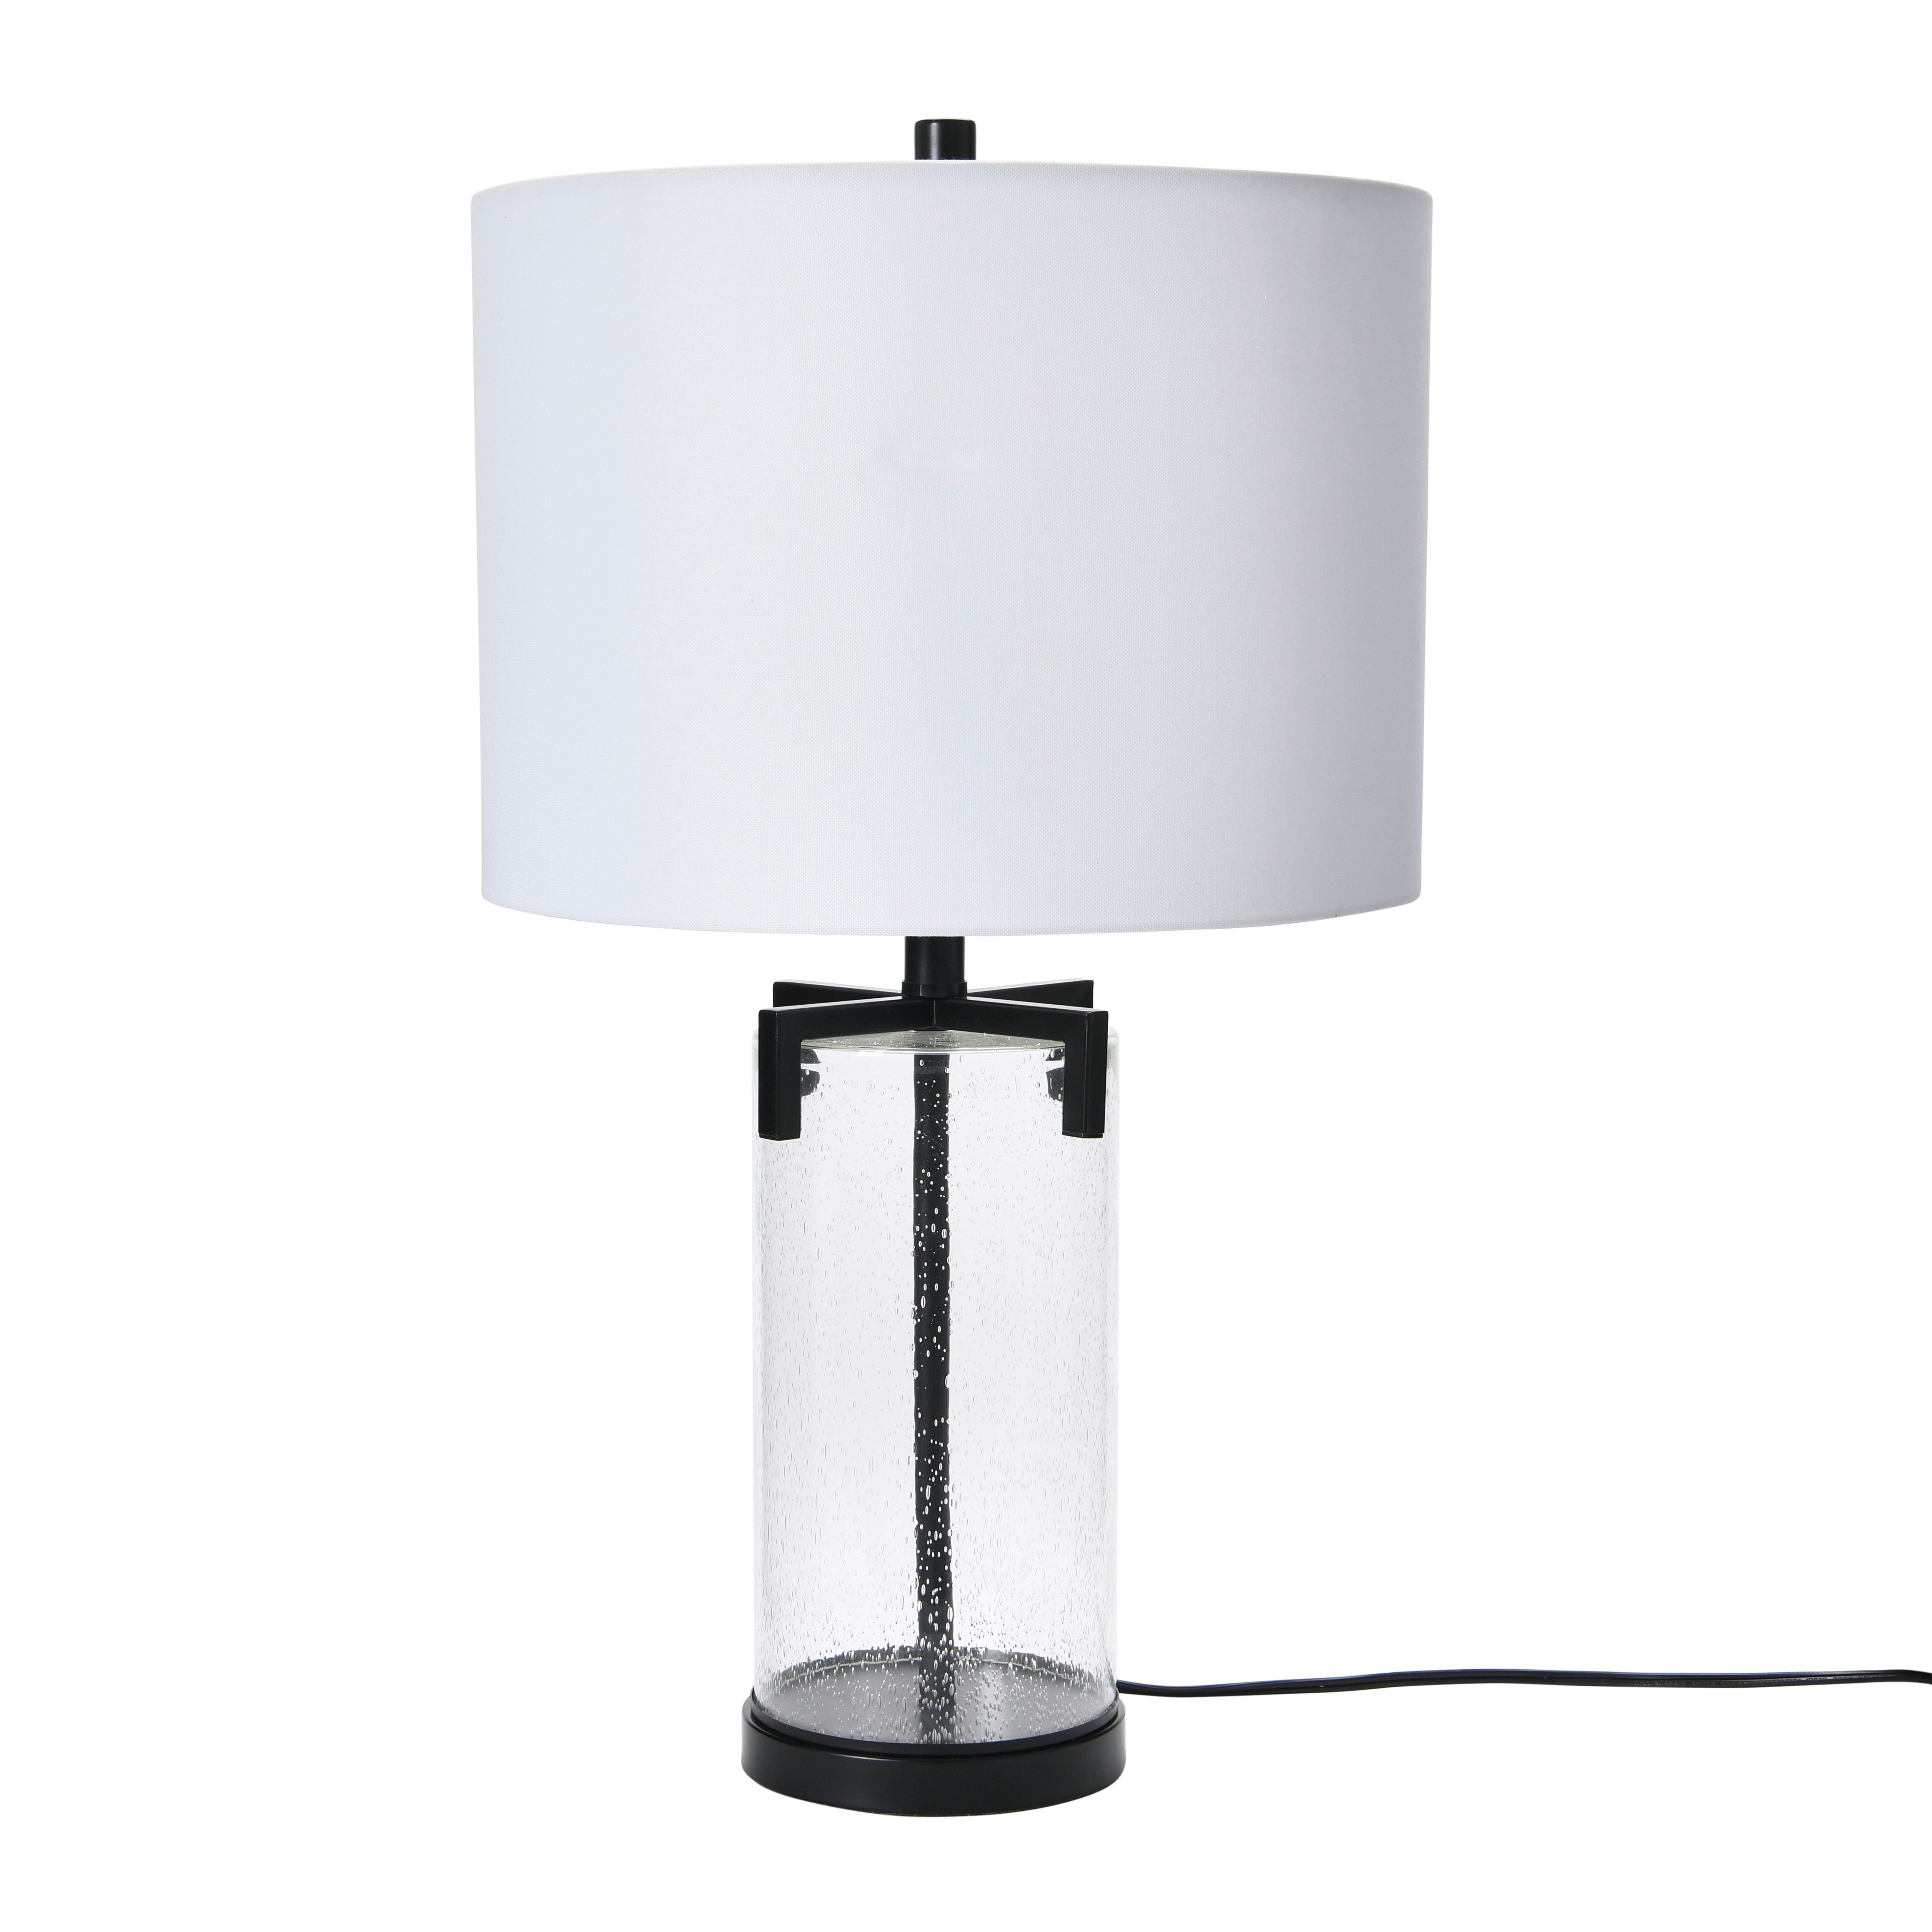 Glass & Black Bedside Accent Lamp with White Linen Shade - Nomad Home